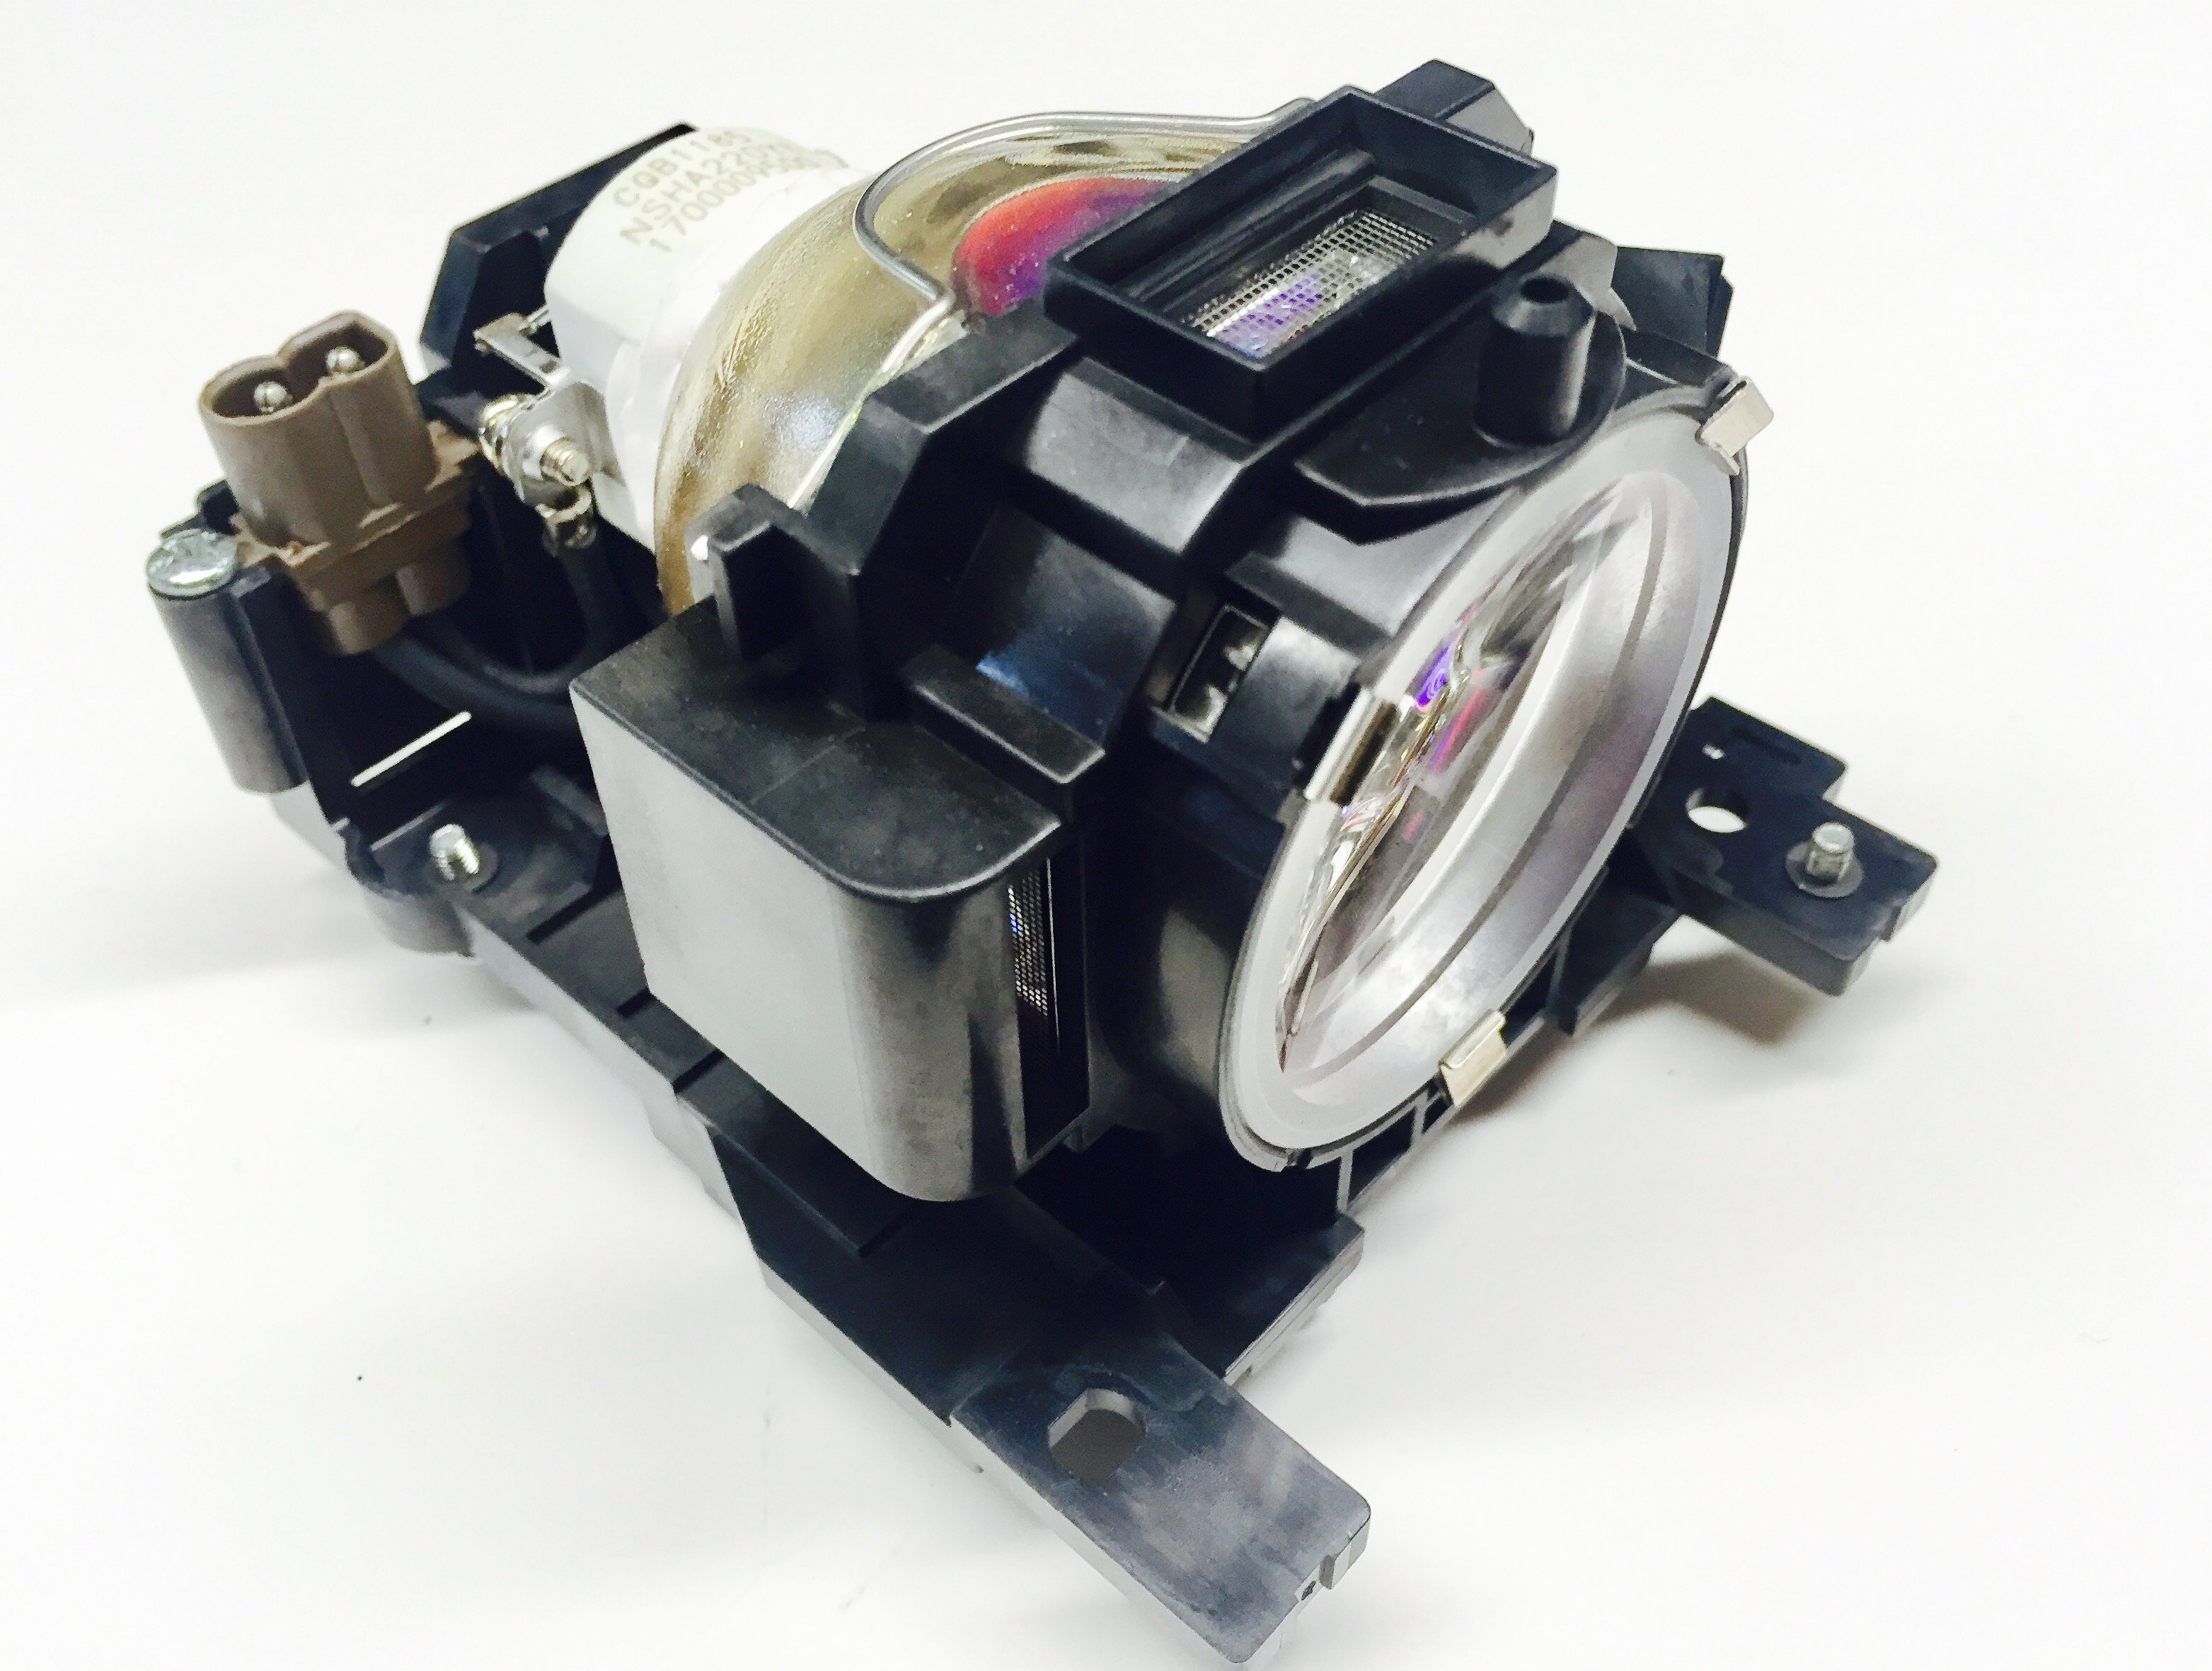 DT00891 Replacement Lamp & Housing for Hitachi Projectors - image 1 of 6